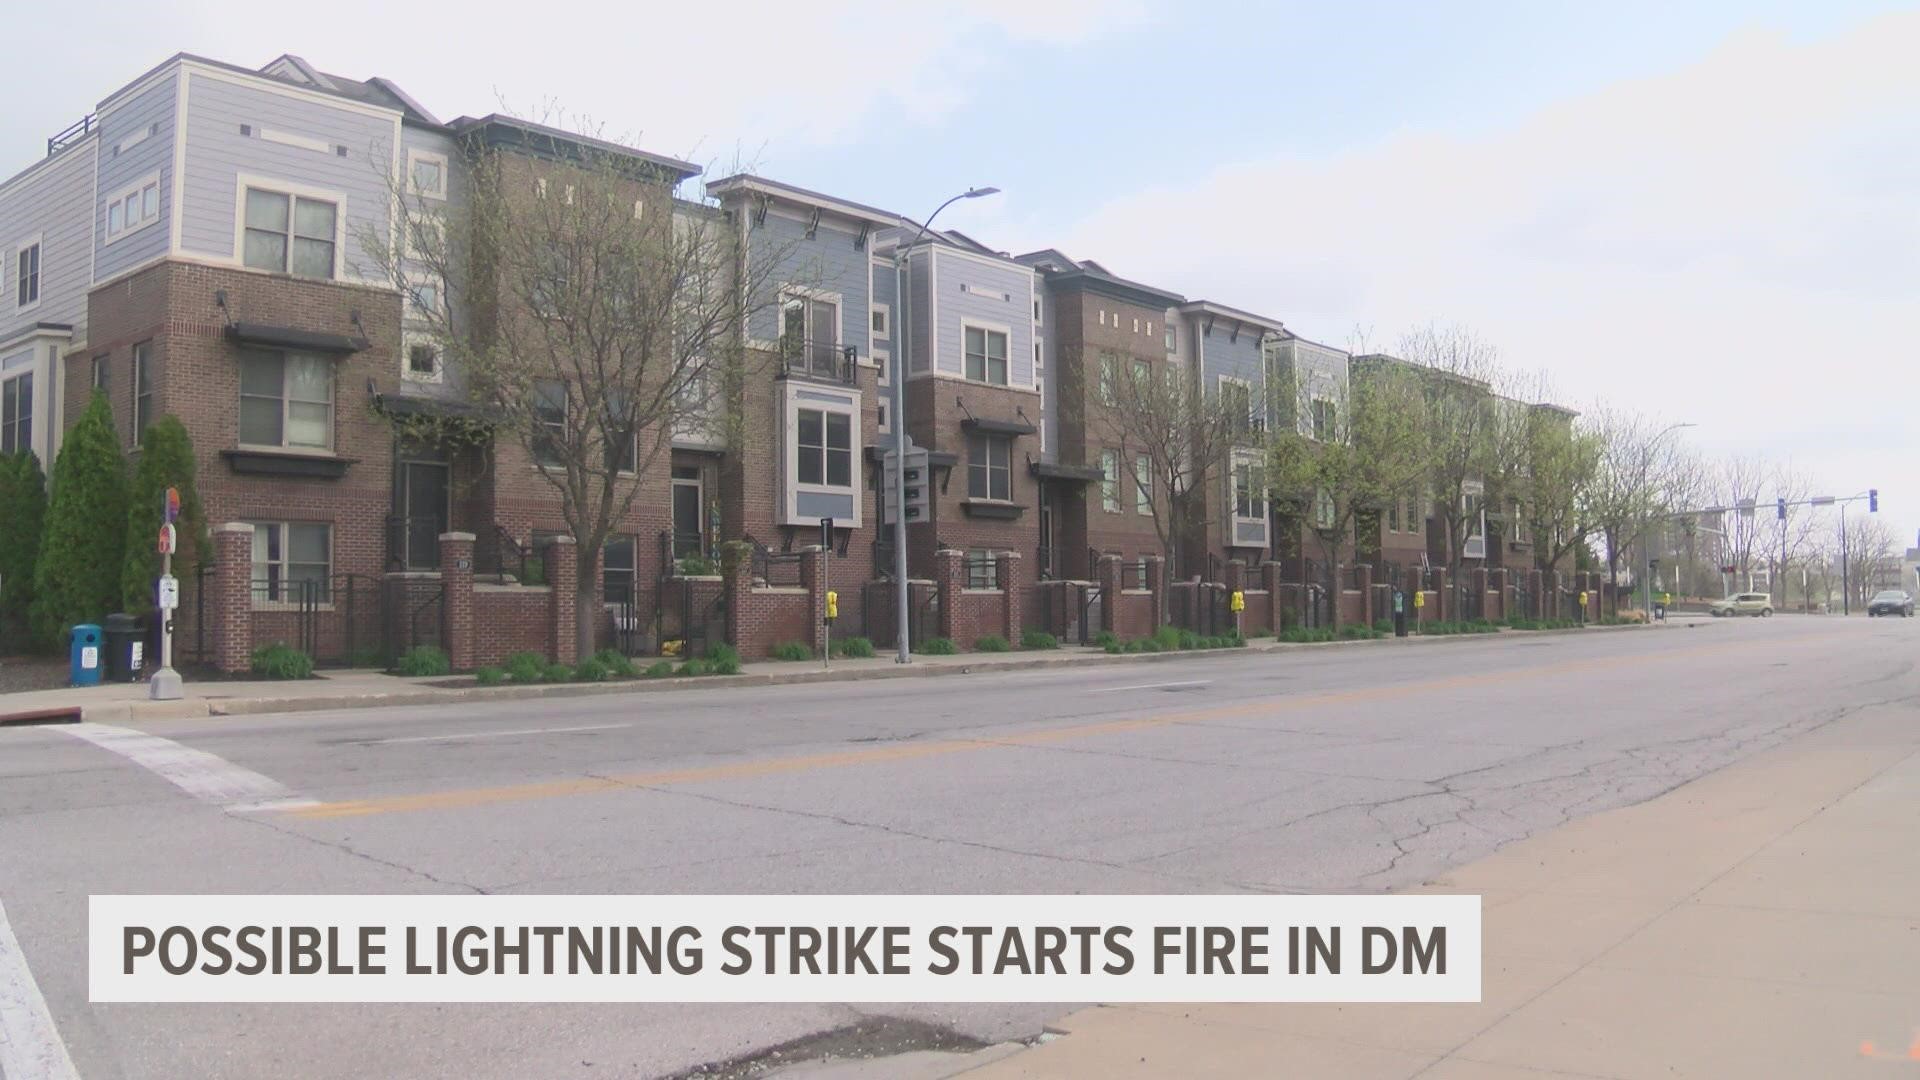 The Des Moines Fire Department said most residents are displaced due to utilities being shut off.